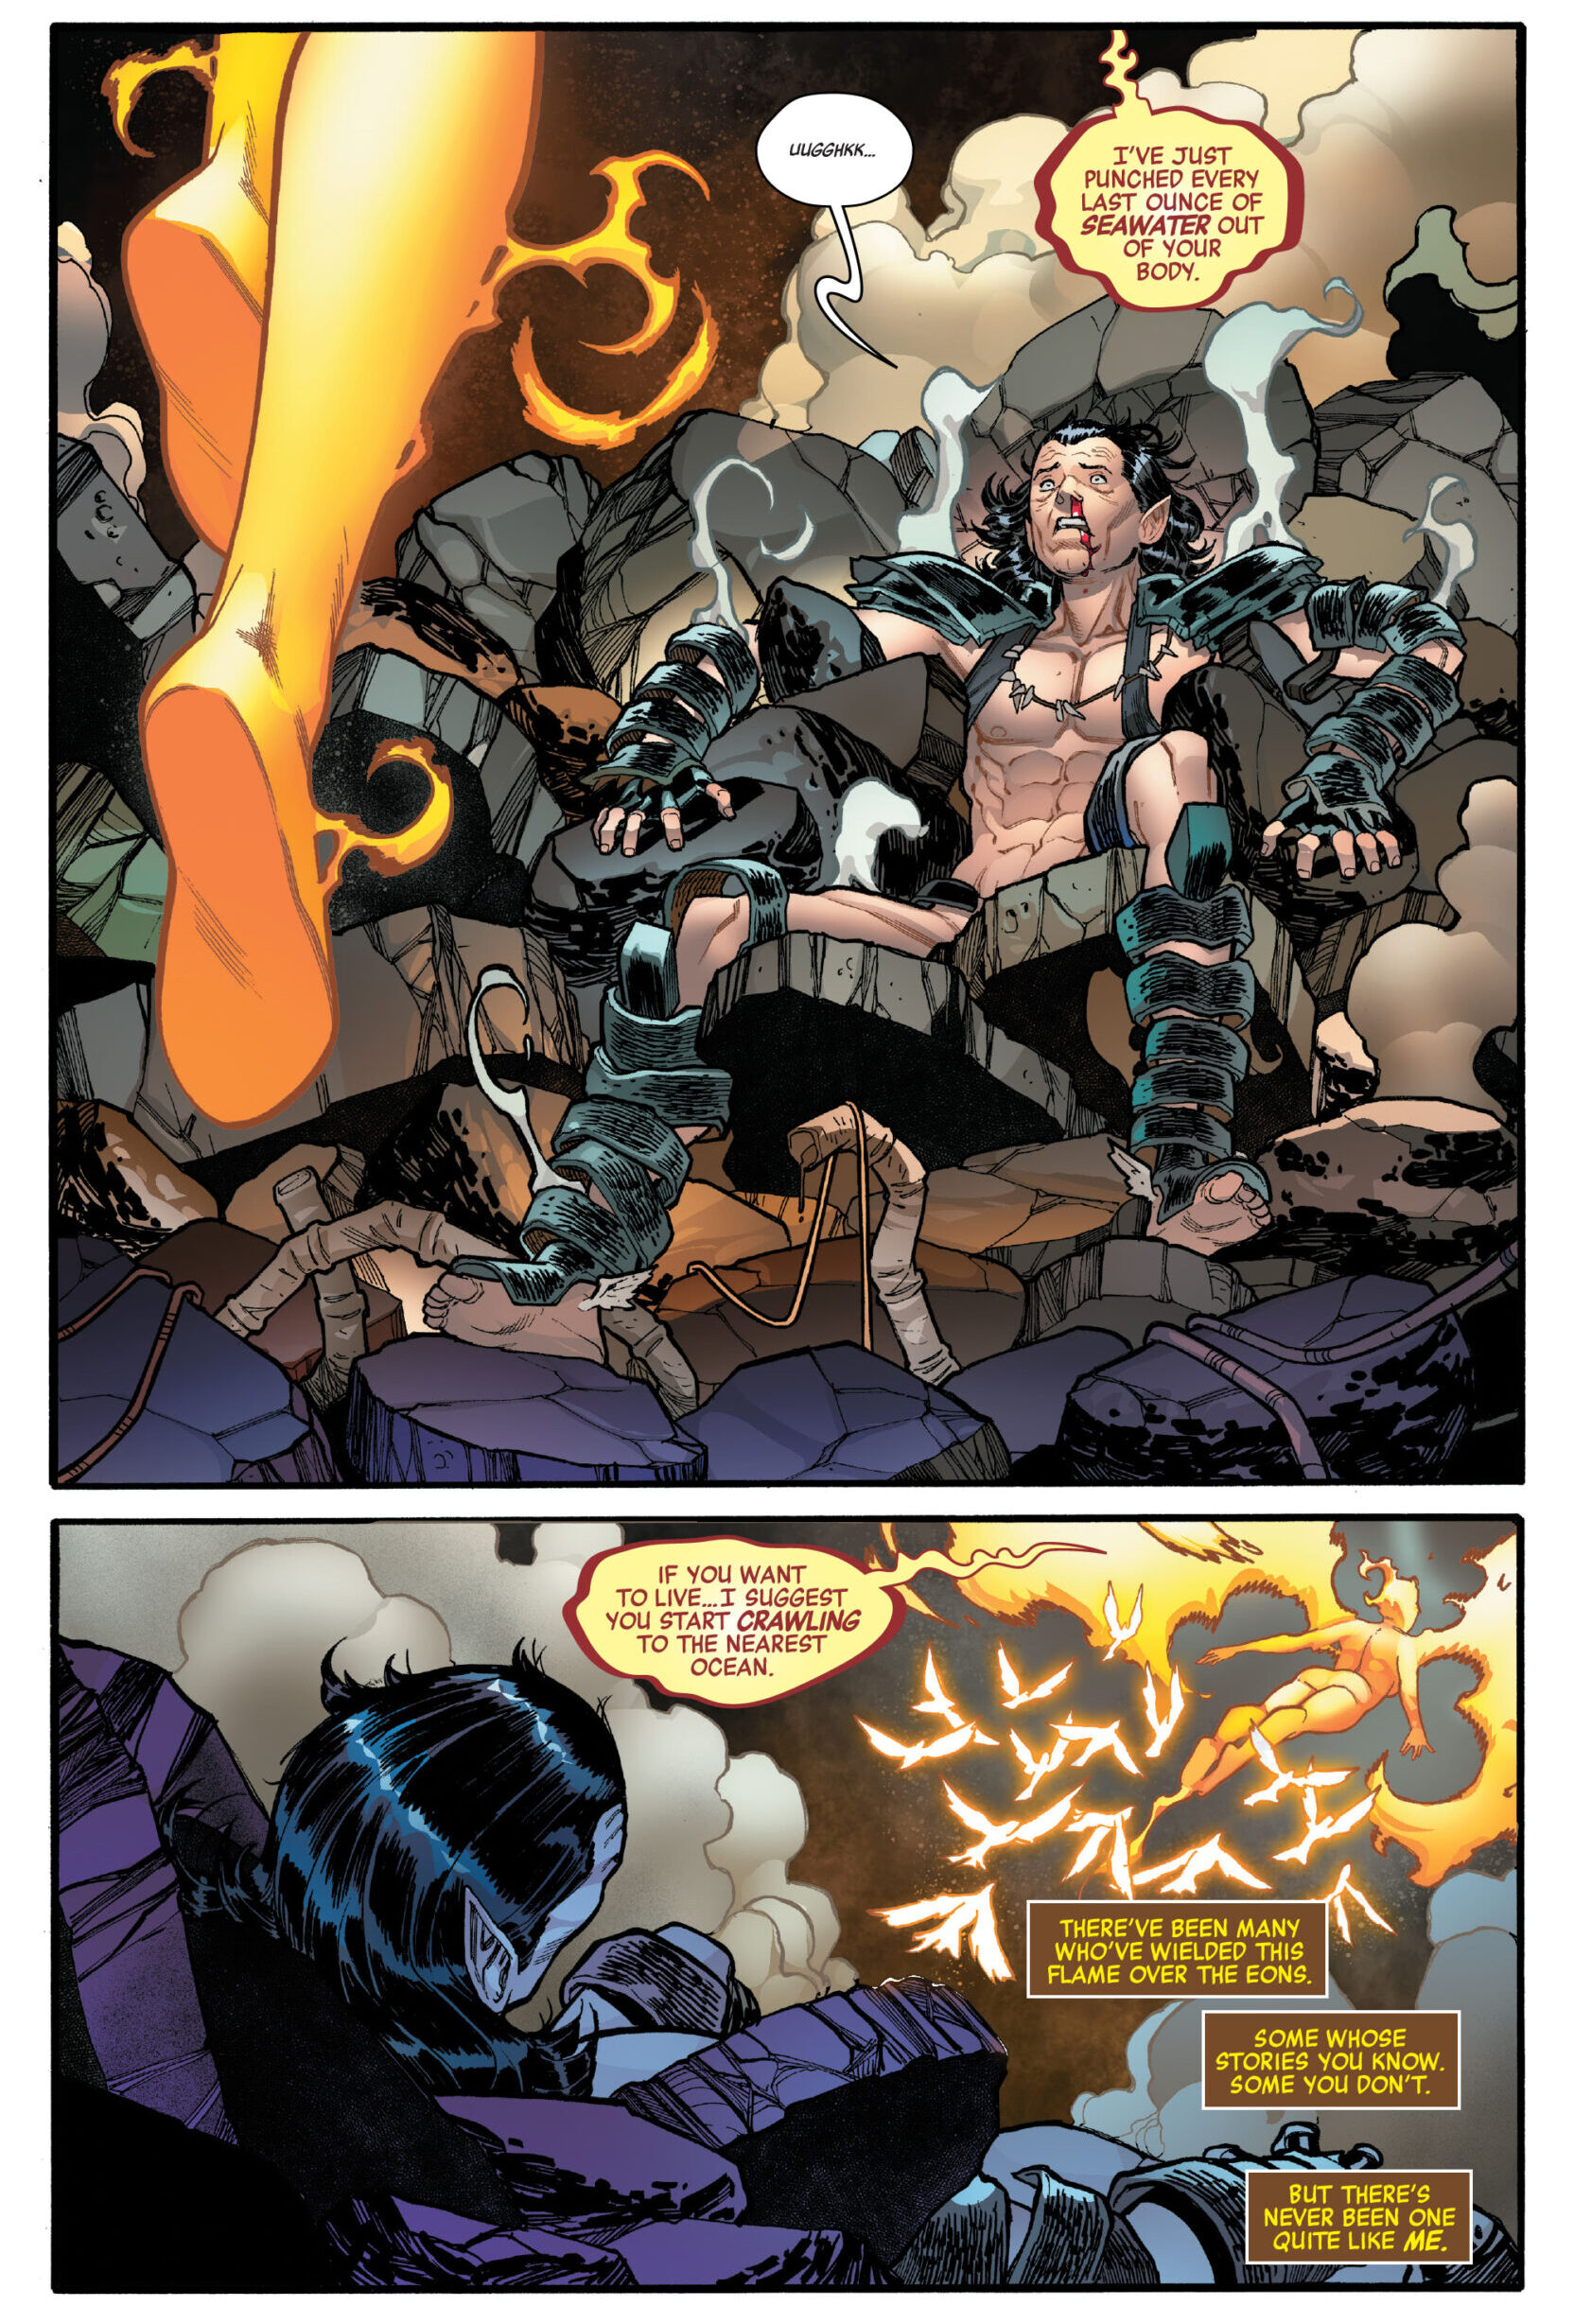 Echo takes the mantle of 'Phoenix' from Namor in Avengers Vol. 8 #44 "Enter the Phoenix - Part Five: I Am... Phoenix!" (2021), Marvel Comics. Words by Jason Aaron, art by Javier Garrón, David Curiel, and Cory Petit.